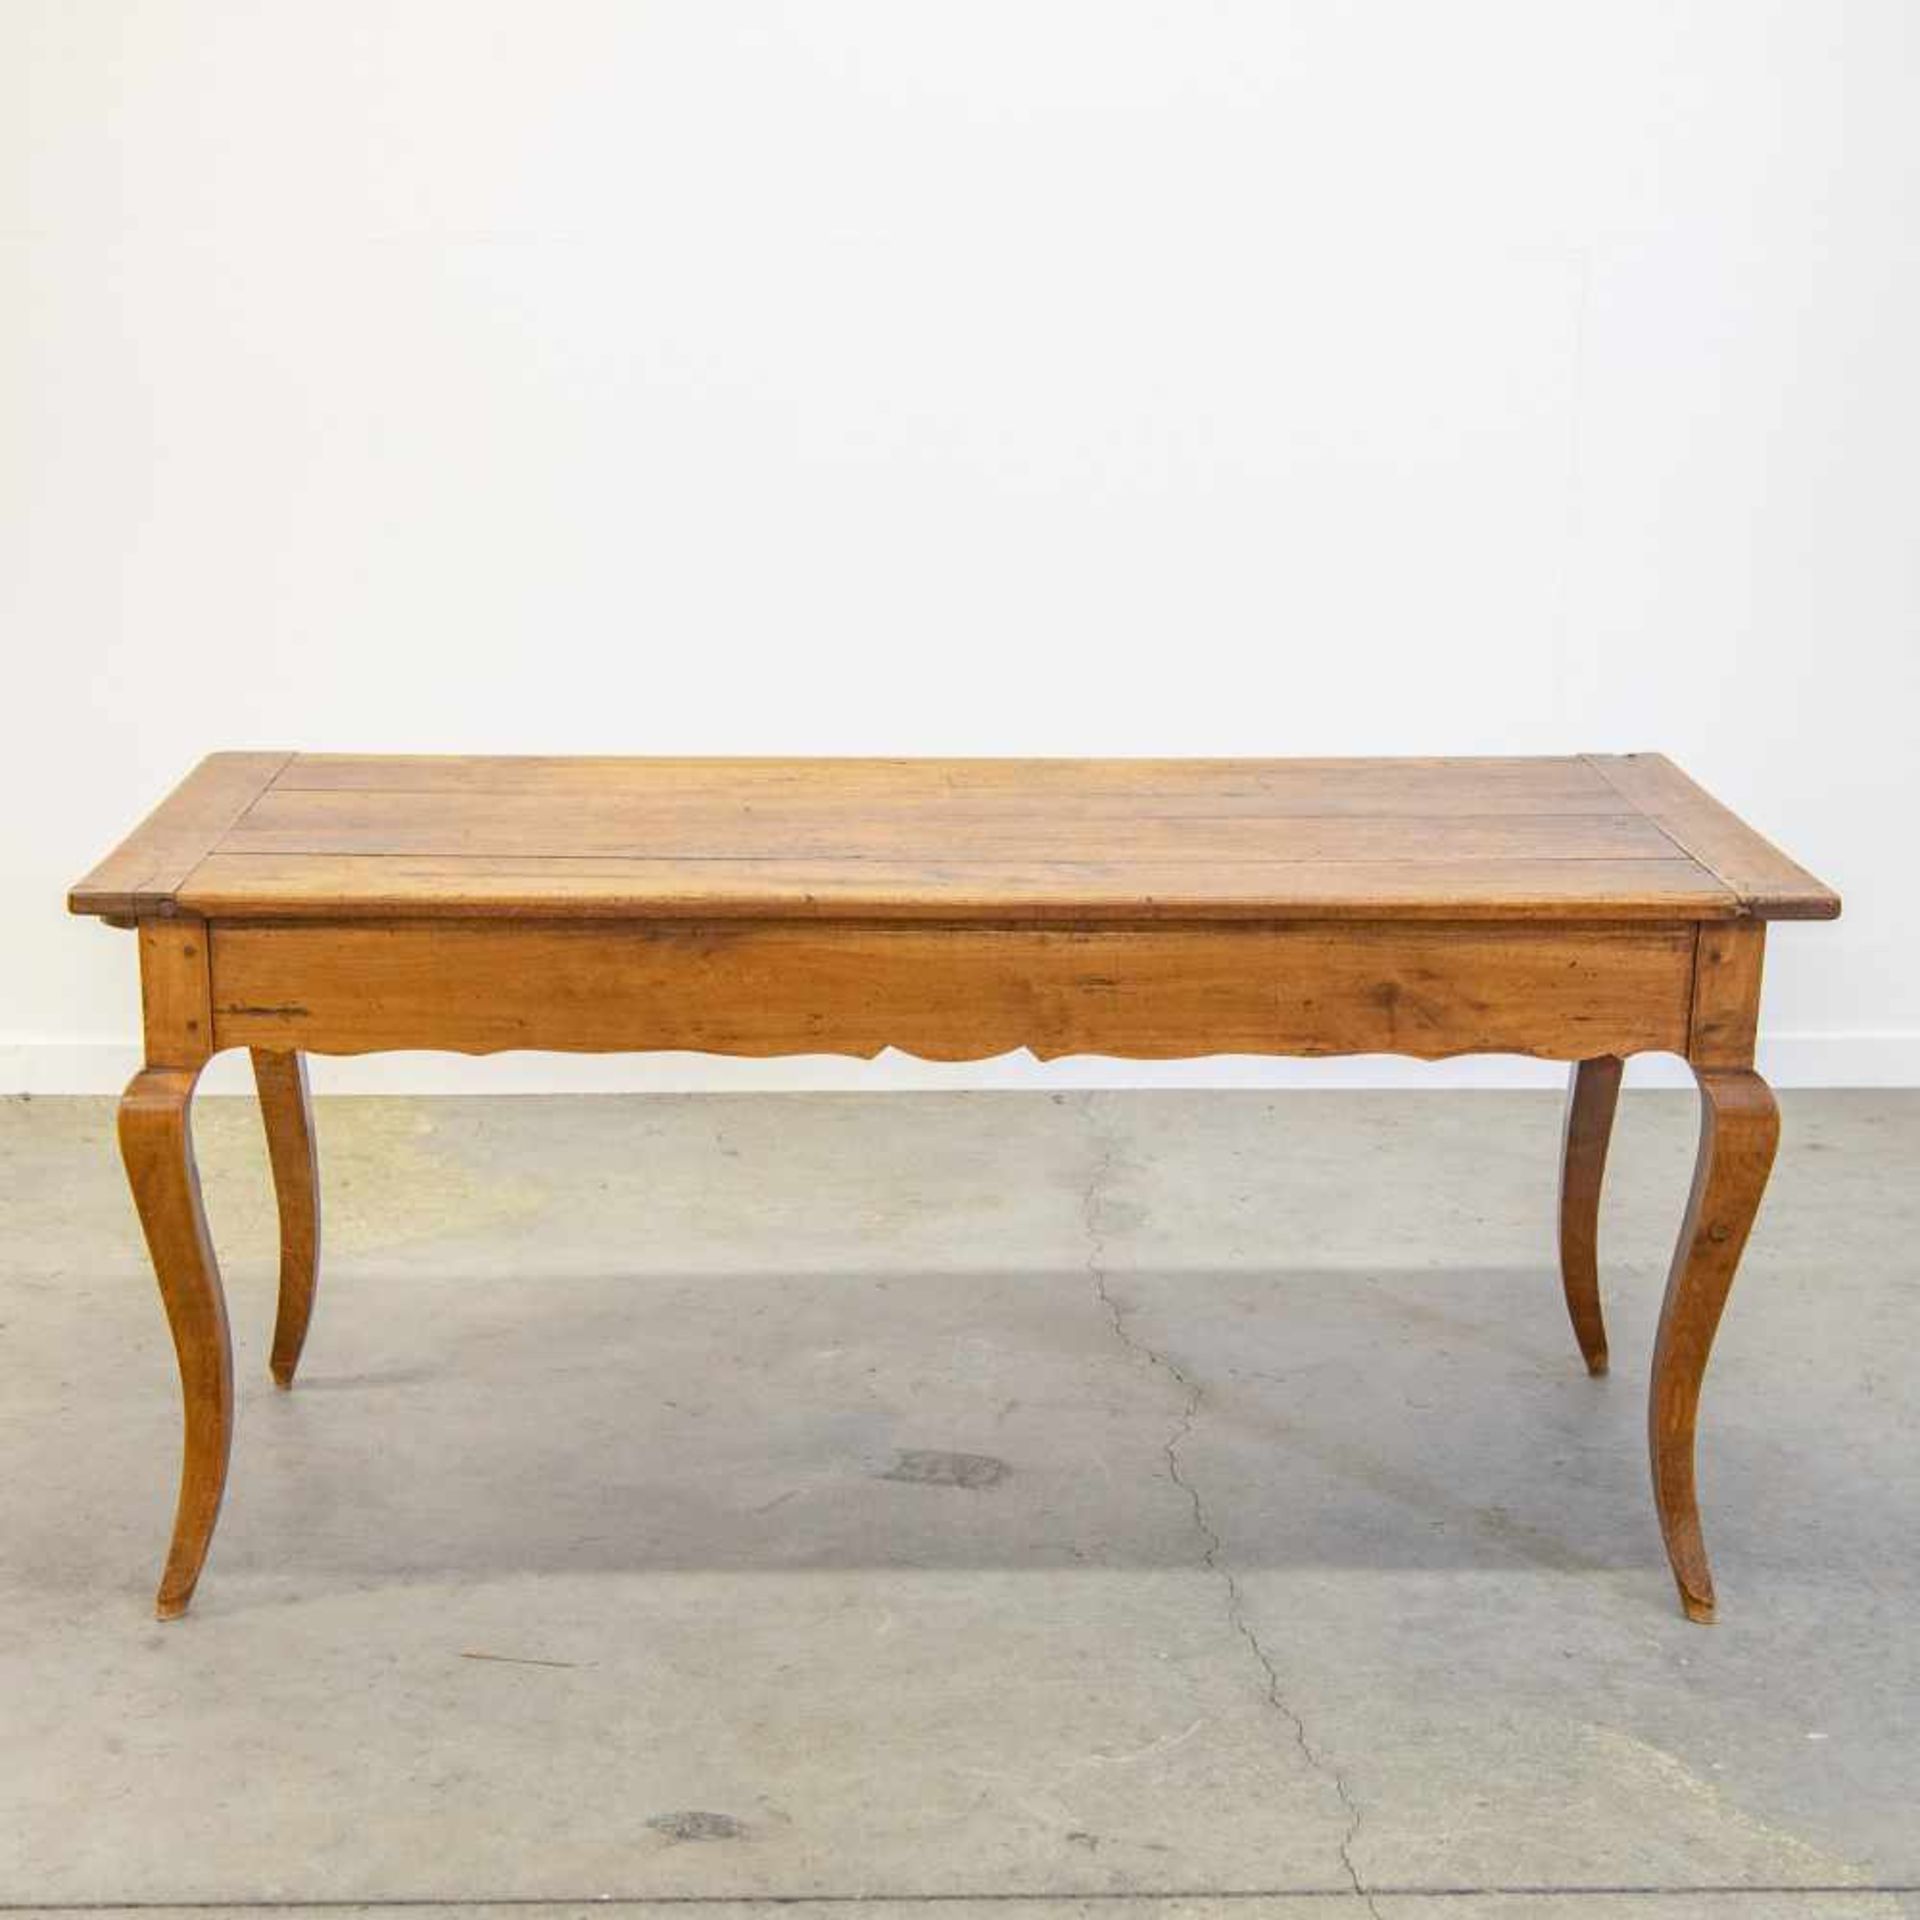 18th century dining room table, with drawer. Length: 175 cm , Width: 75 cm, Hight: 76 cm,